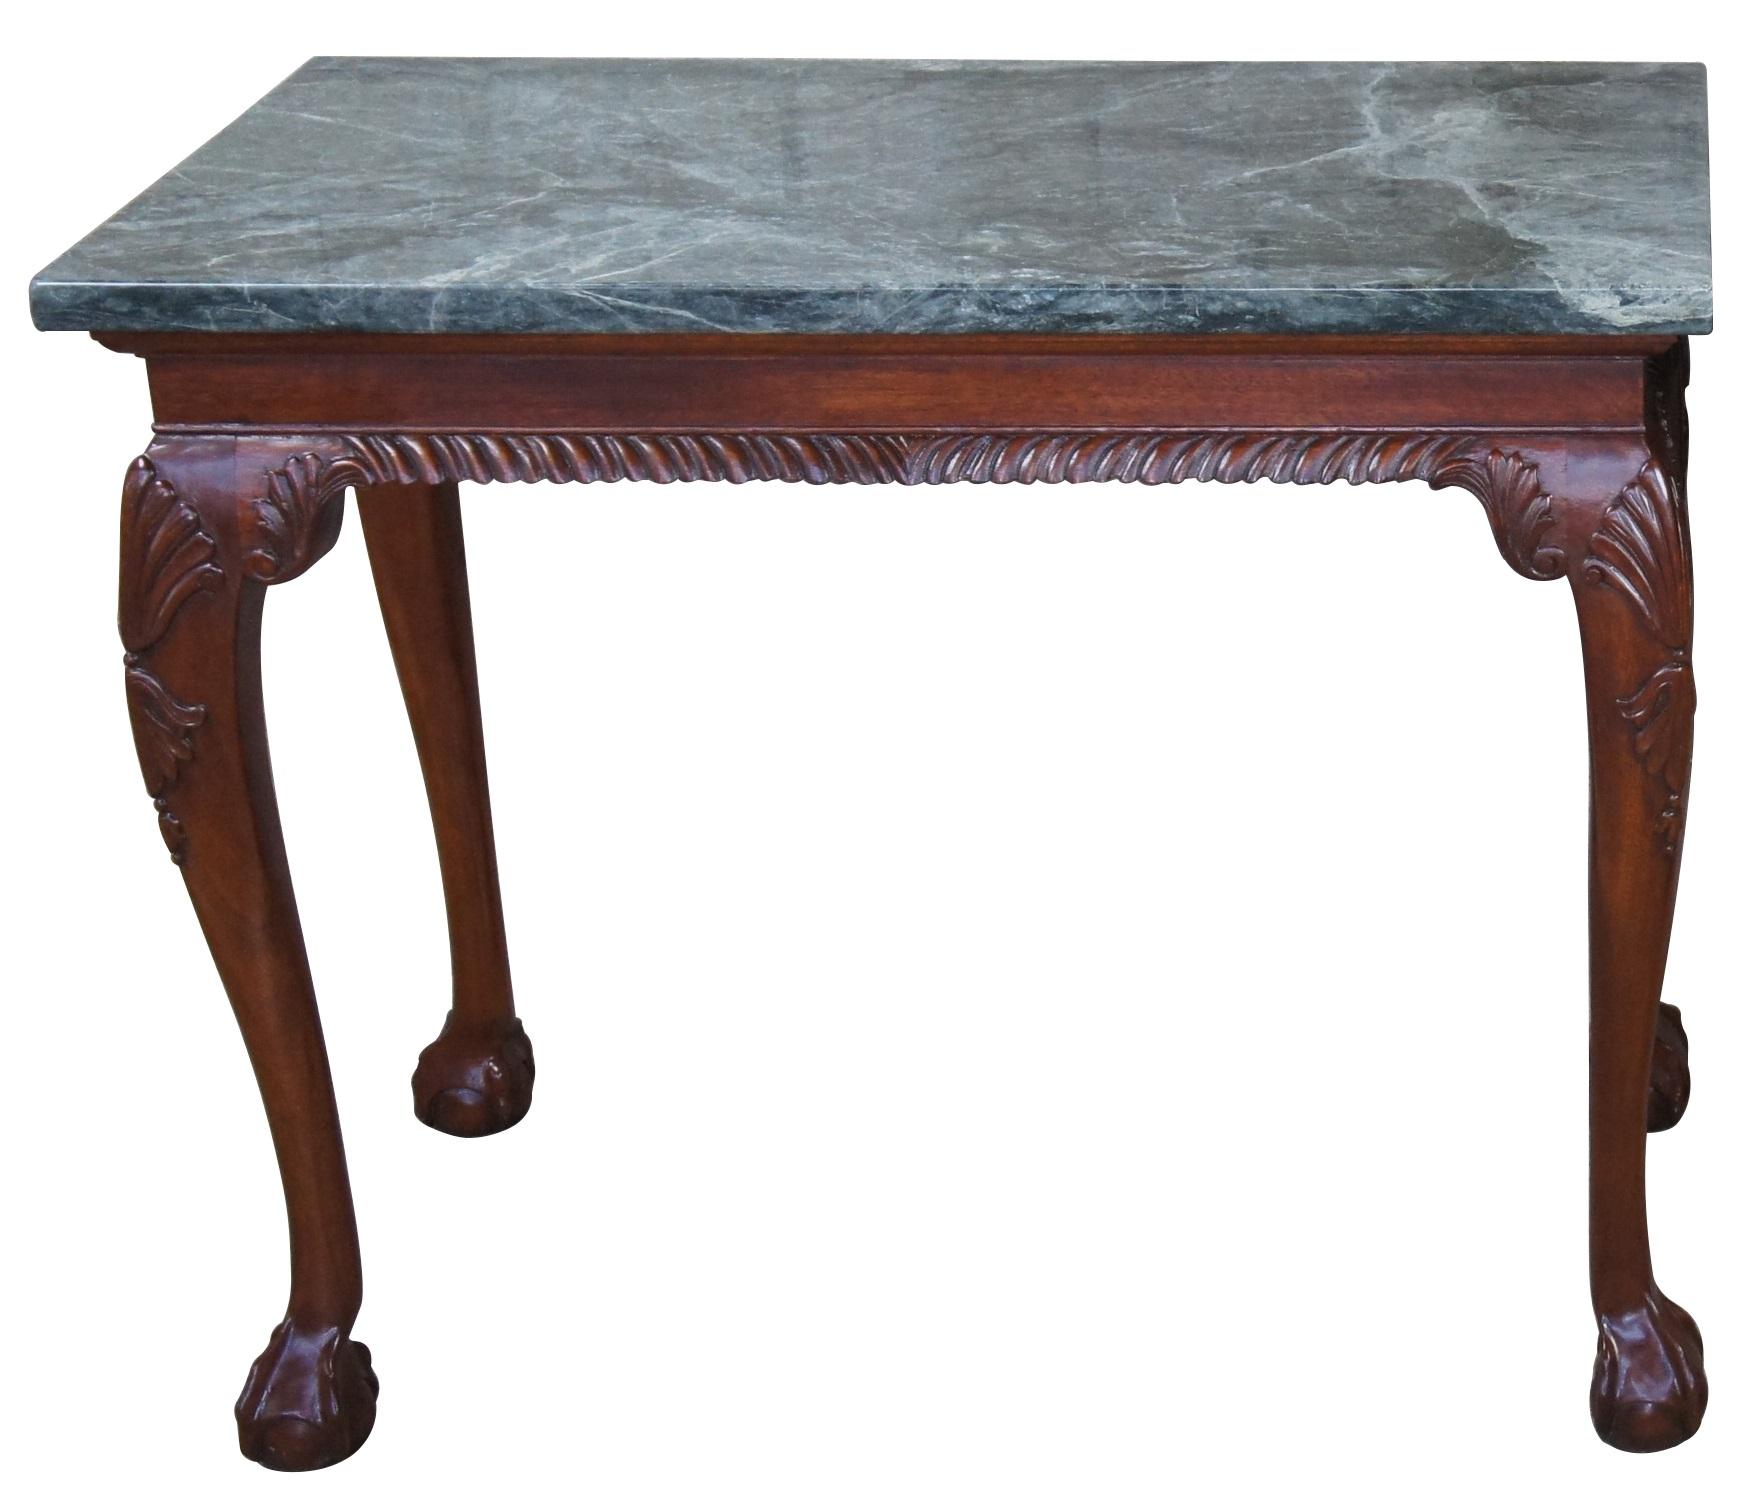 A lovely Chippendale style console table. Made from mahogany with carved legs and gadrooned aprons. Feature green marble tops, ball and claw feet and shell carved legs. A stately addition to any entryway or hallway.
   